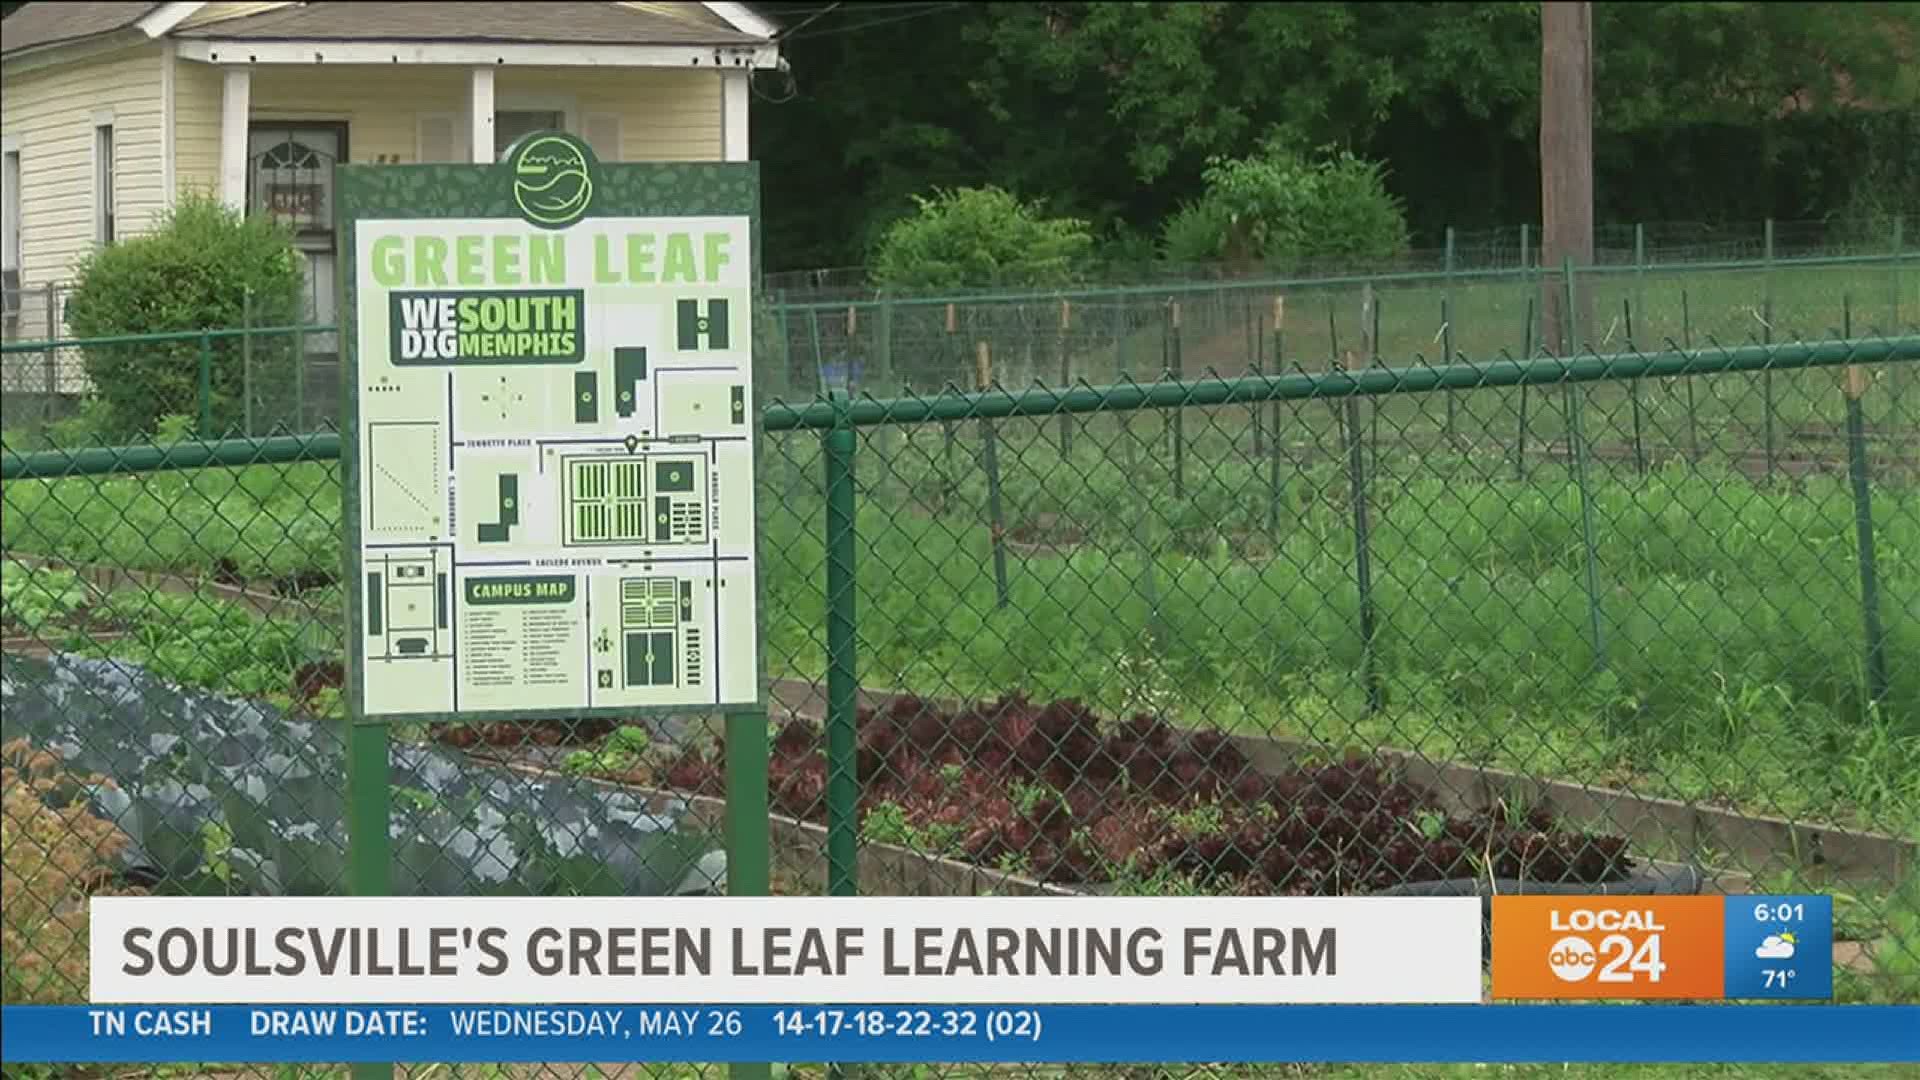 A hidden gem, the Green Leaf Learning Farm was started to support the nutritional needs or the community where healthy food options are limited.